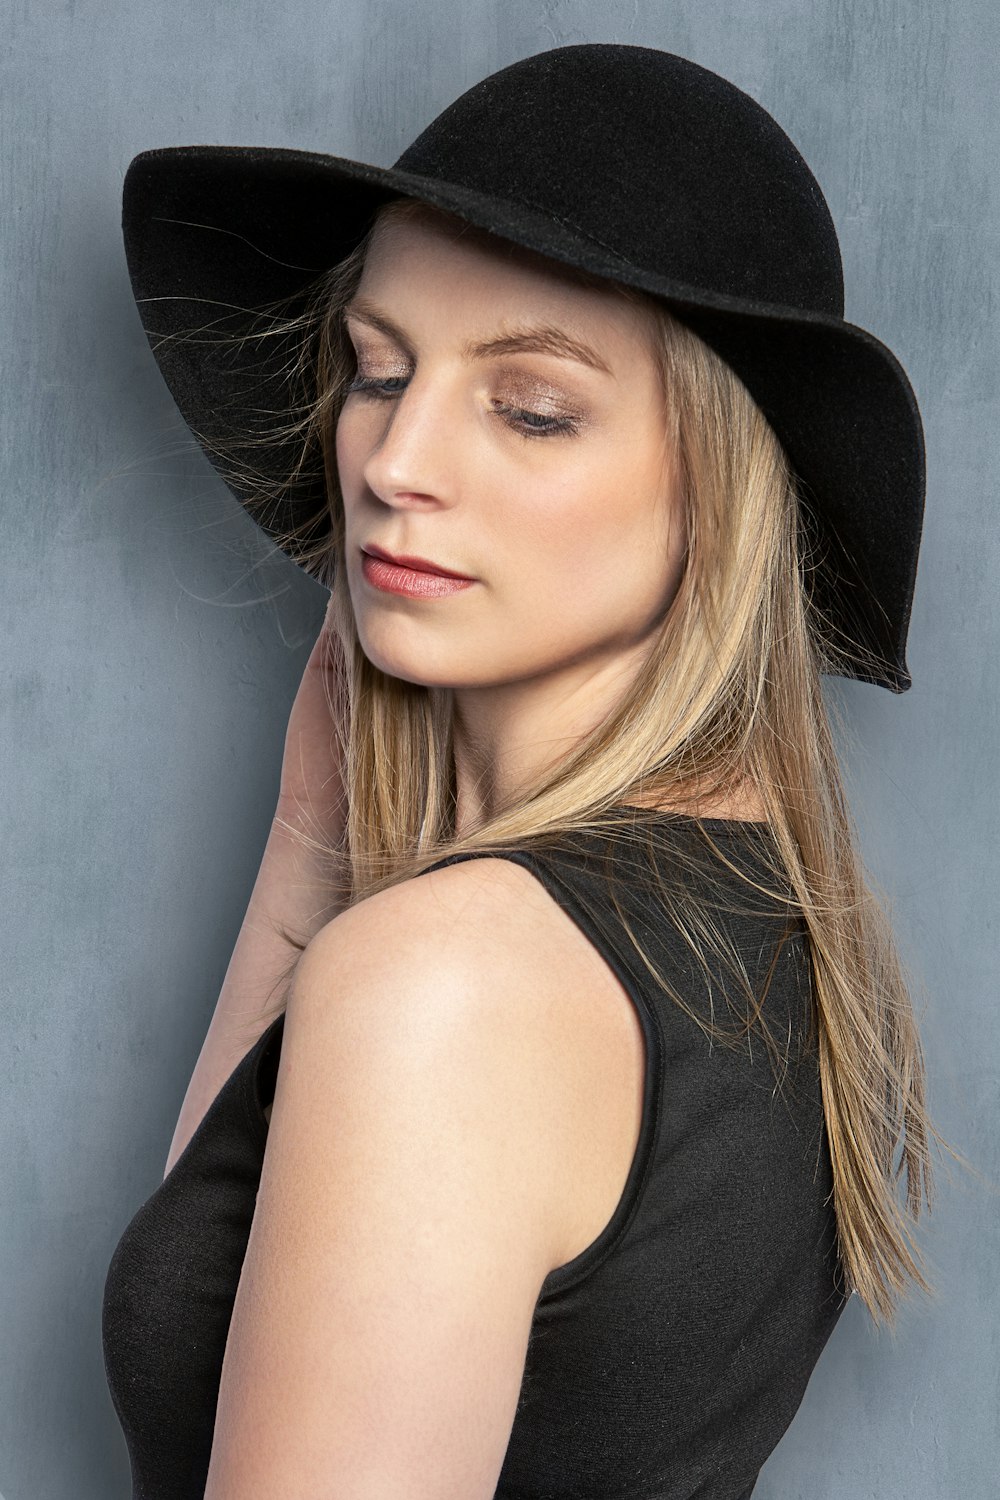 a woman in a black dress and a black hat